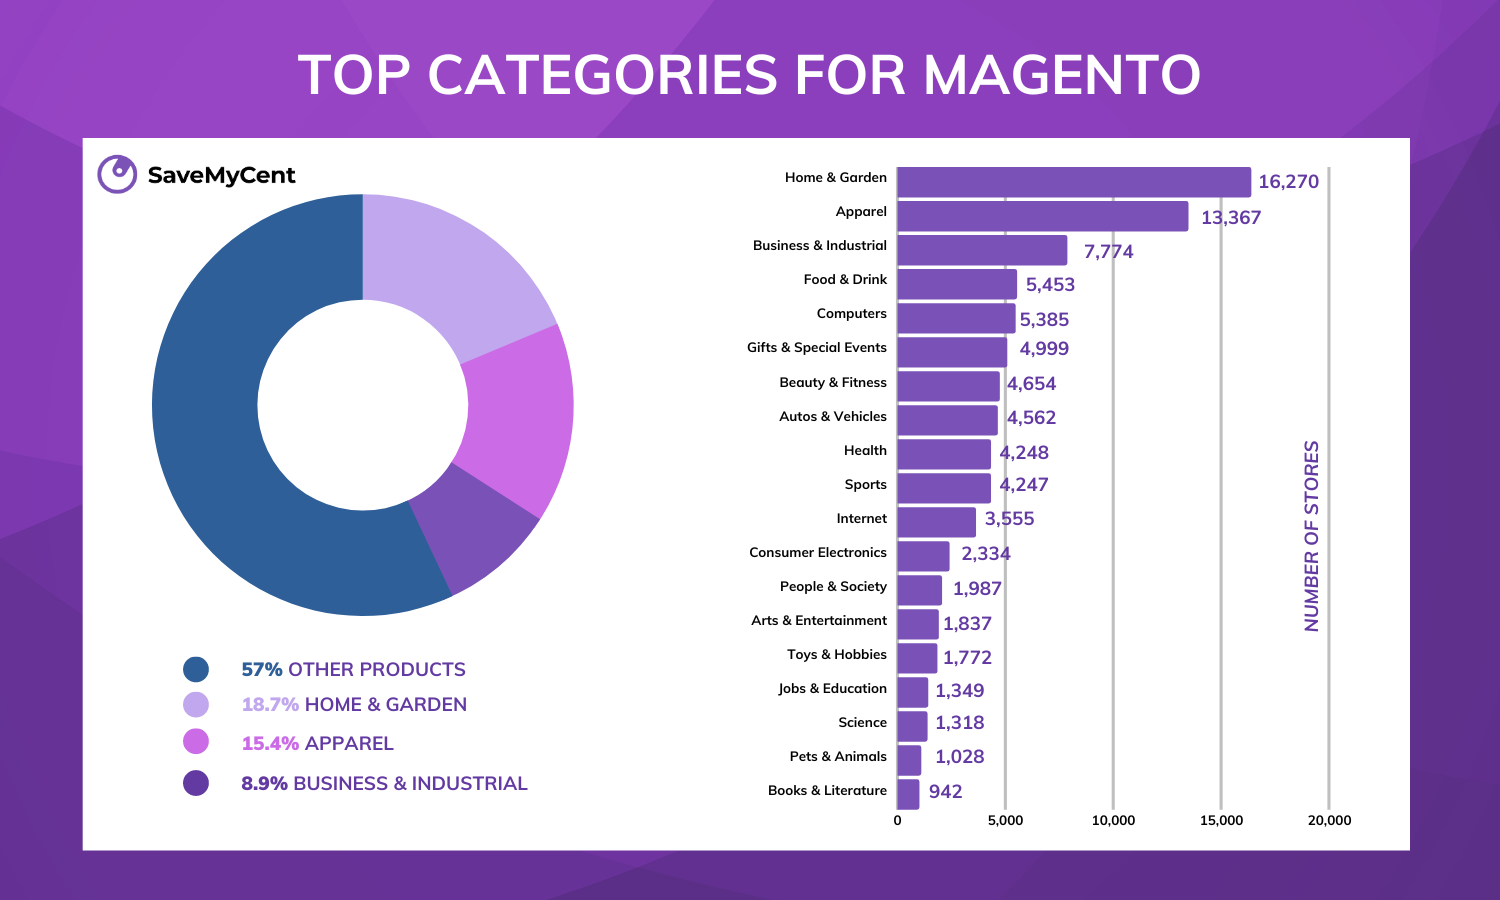 The top industries that use Magento